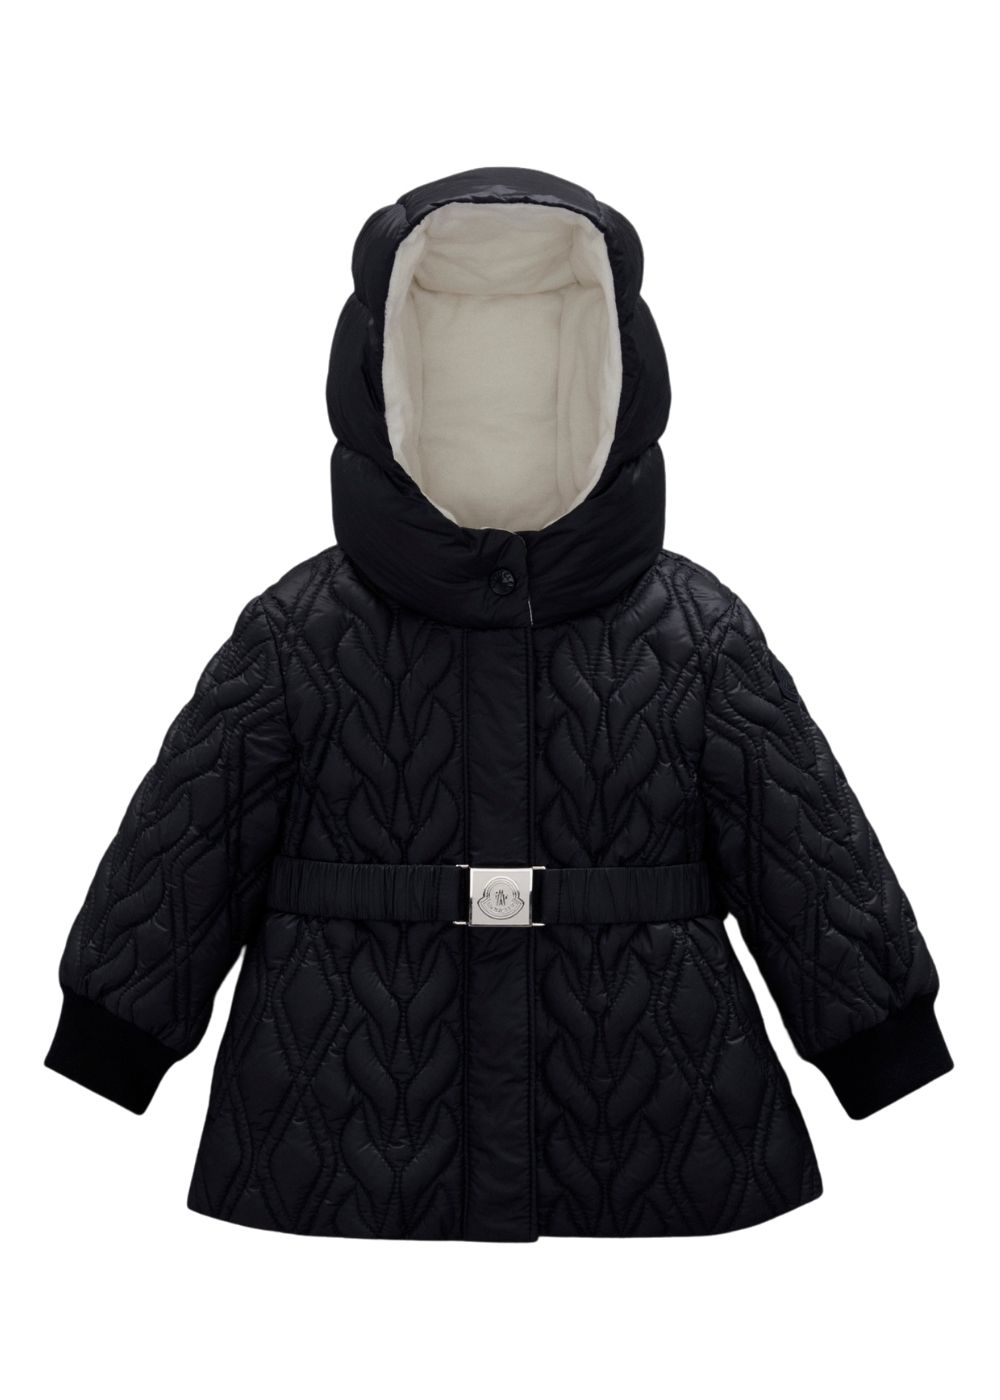 Featured image for “MONCLER SUHER”